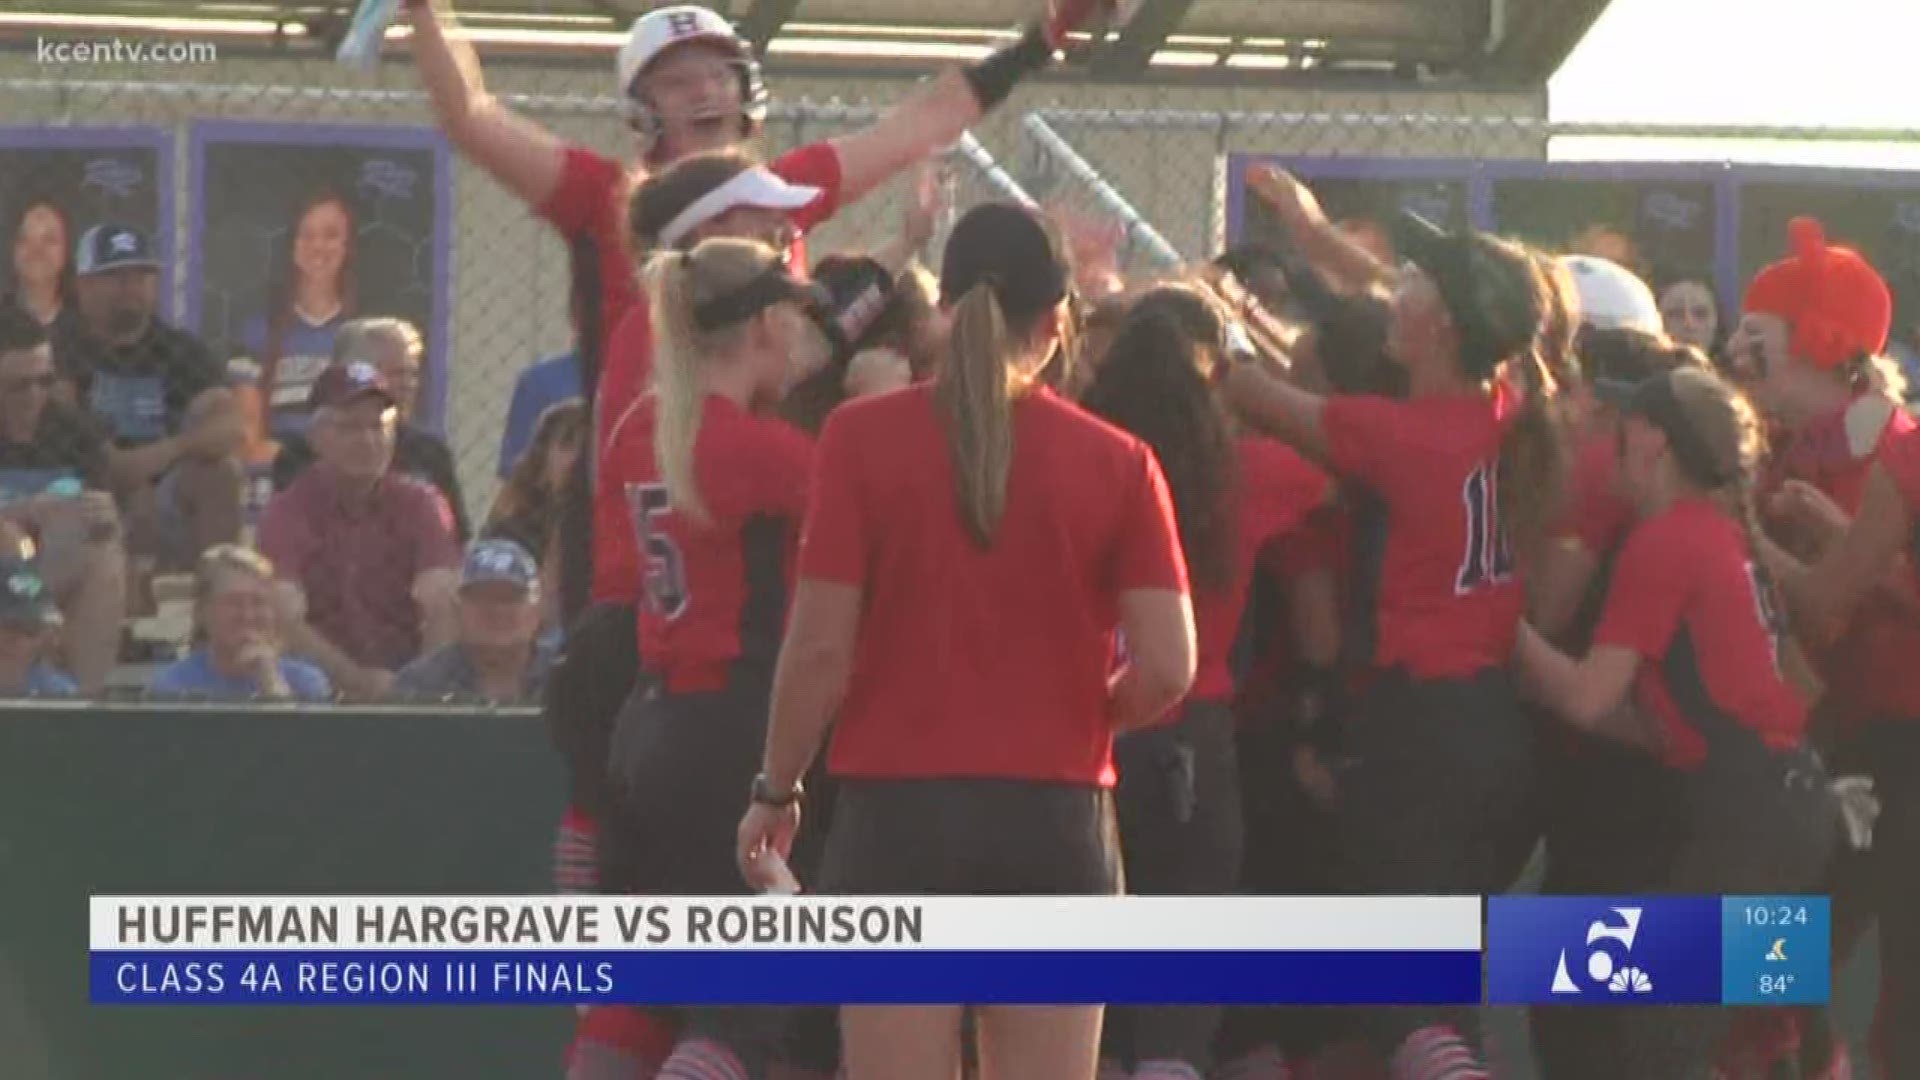 Huffman took game one 3-2 over Robinson.